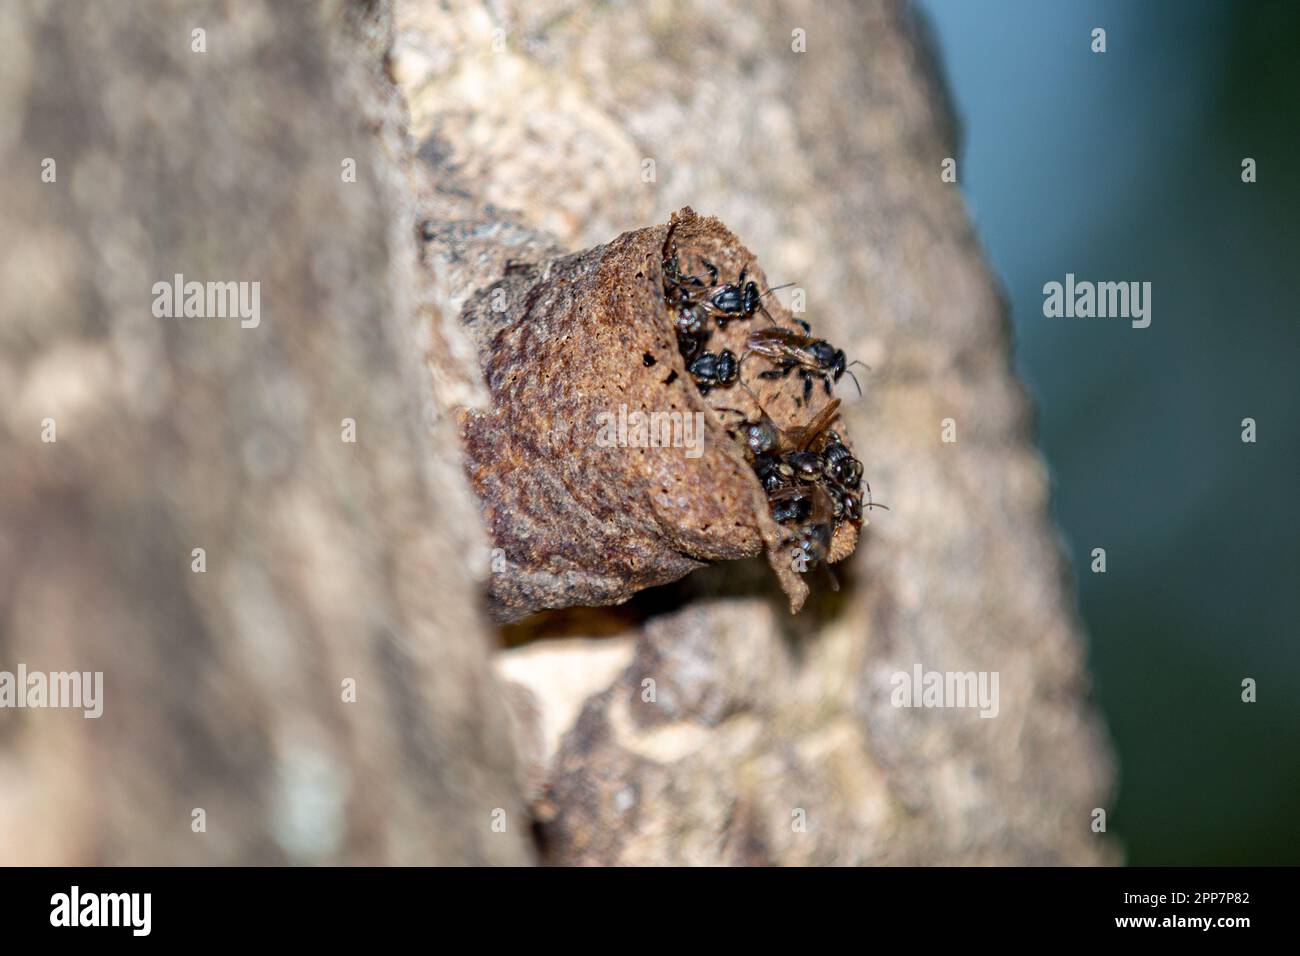 Stingless bees native to Brazilian forests. Nest in the tree trunk Stock Photo